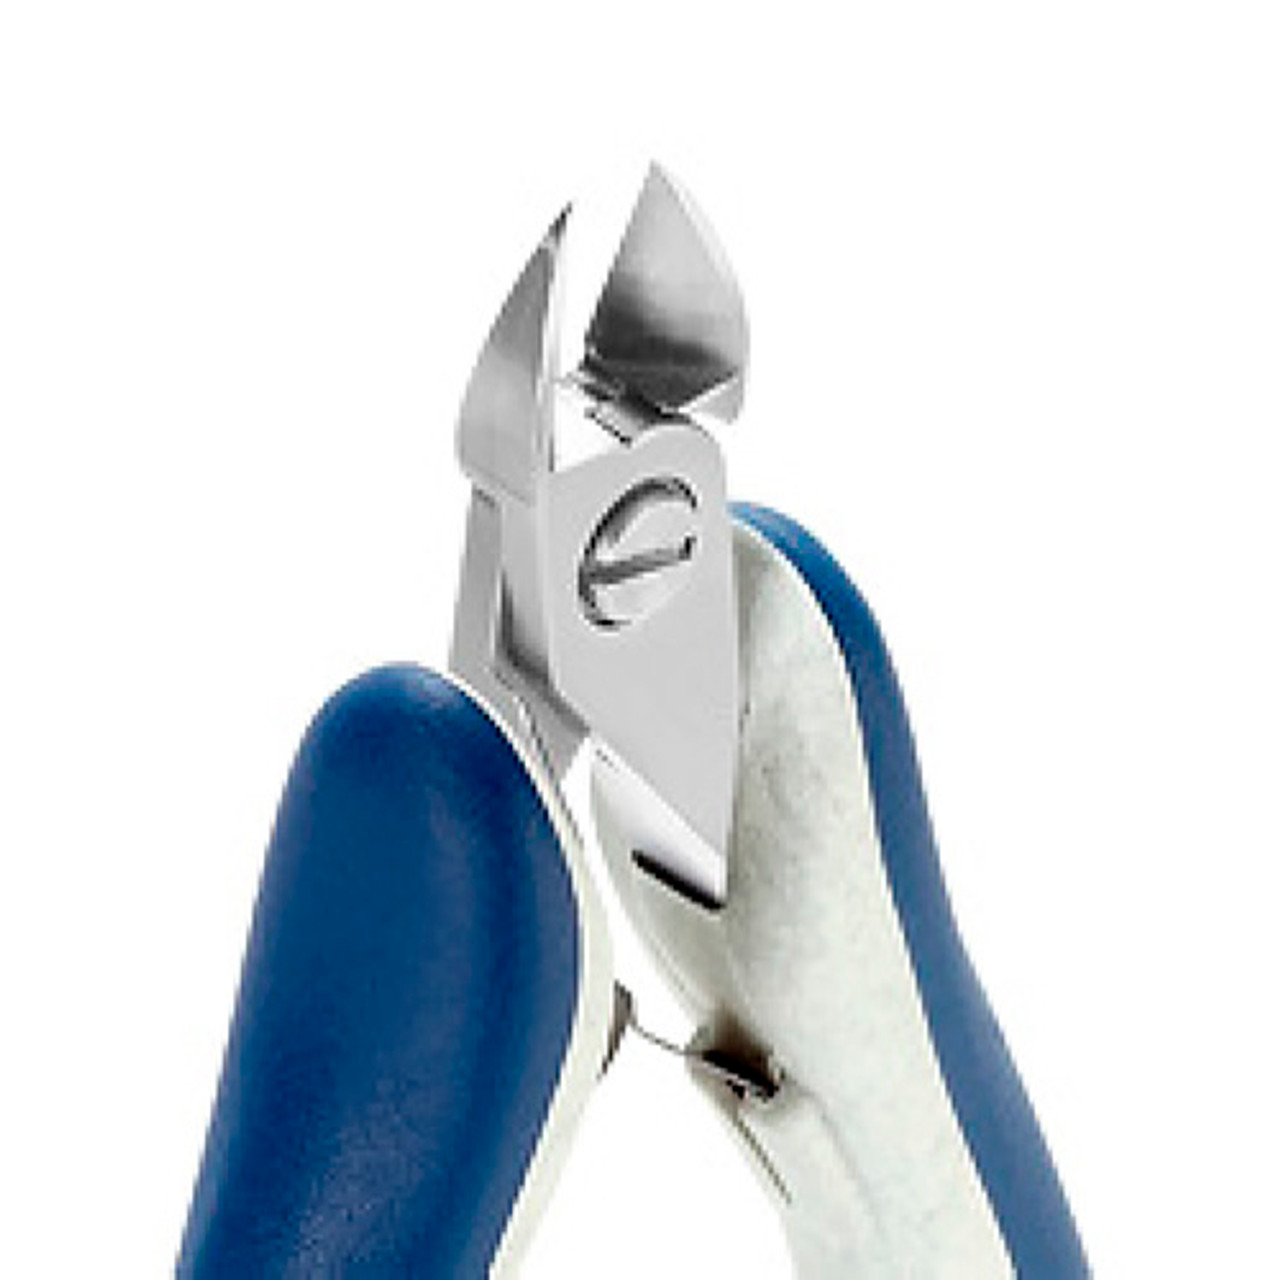 Grobet USA® Teborg® Extra Large Oval Cutters - Semi Flush